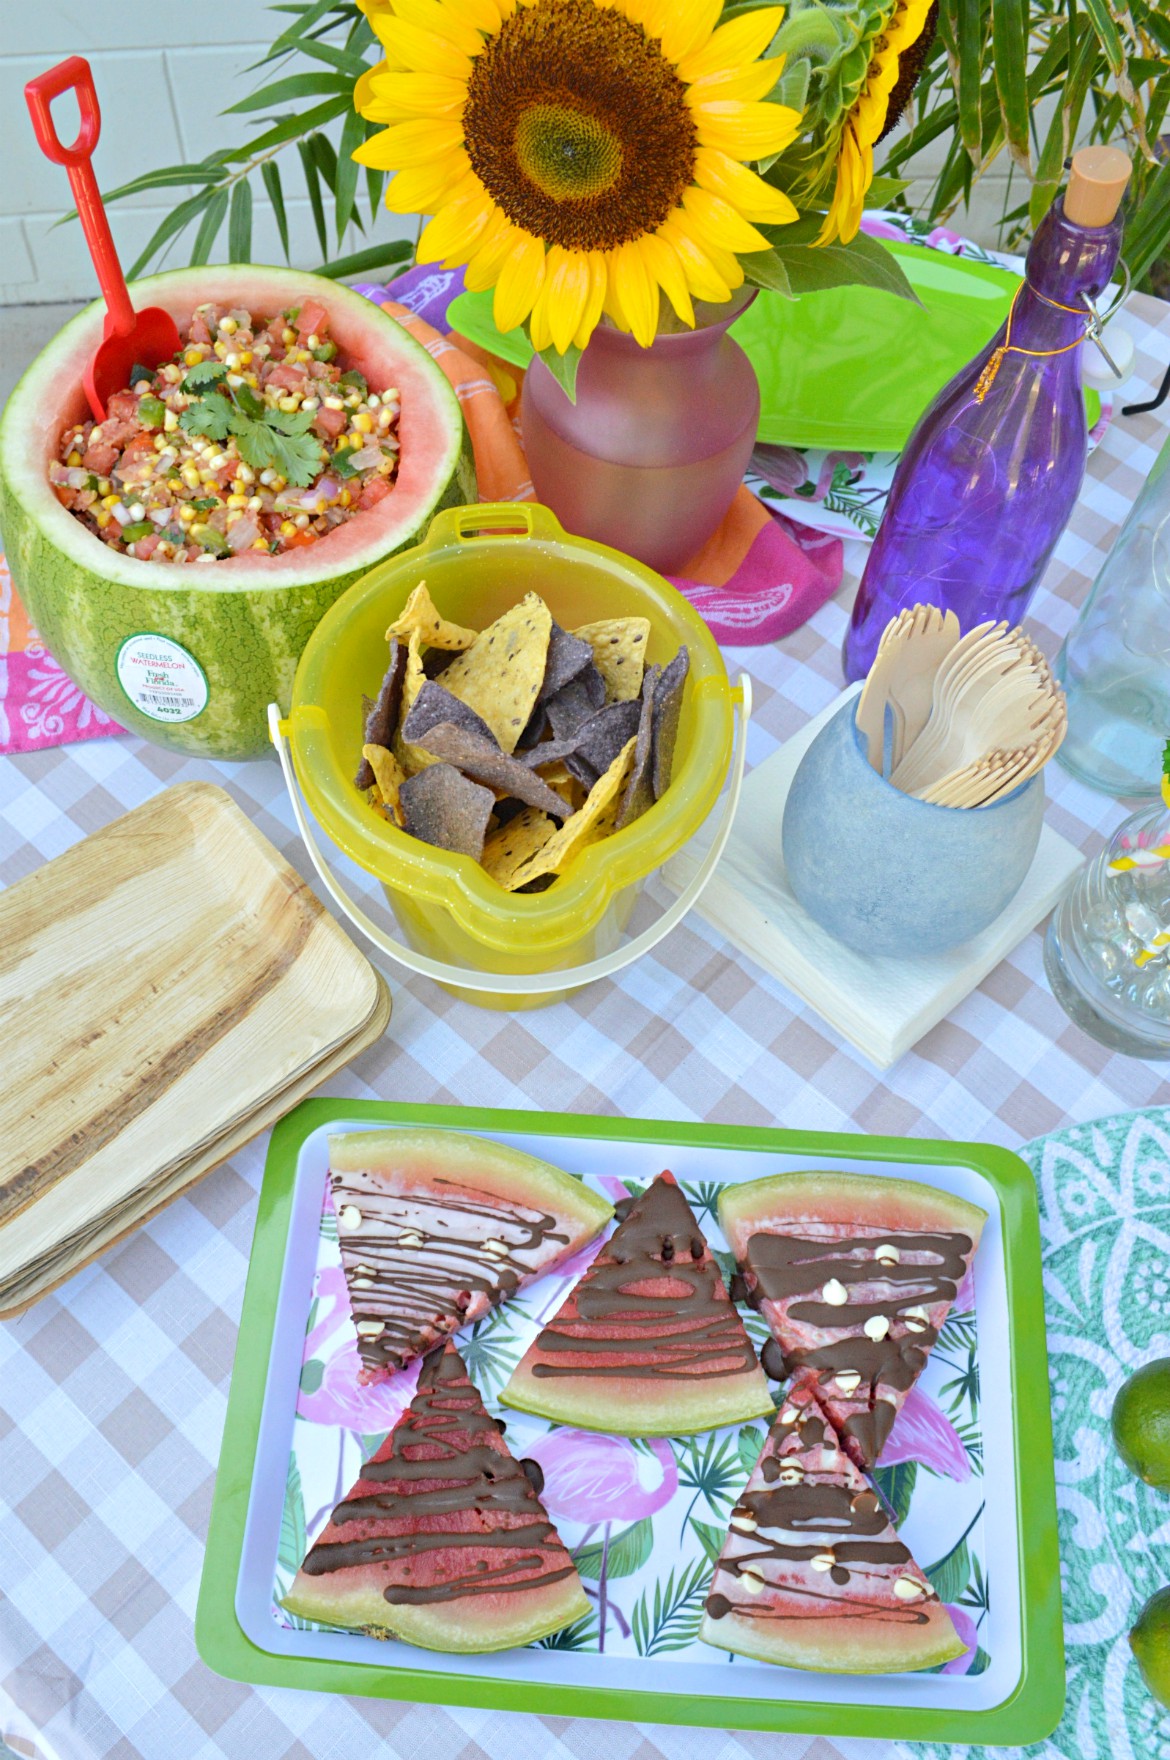 Celebrating Summer With An Outdoor Dinner Party | #ad #freshfromflorida #produceparty | How to throw an eco-friendly summer dinner party | Summer outdoor party idea featuring fresh produce | Summer pool party recipes and outdoor party decorations | Celebrating summer with Fresh From Florida recipes | Watermelon and sweet corn recipes | #summerparty #freshrecipes #cornsalsa #fruitrecipes | theMRSingLink